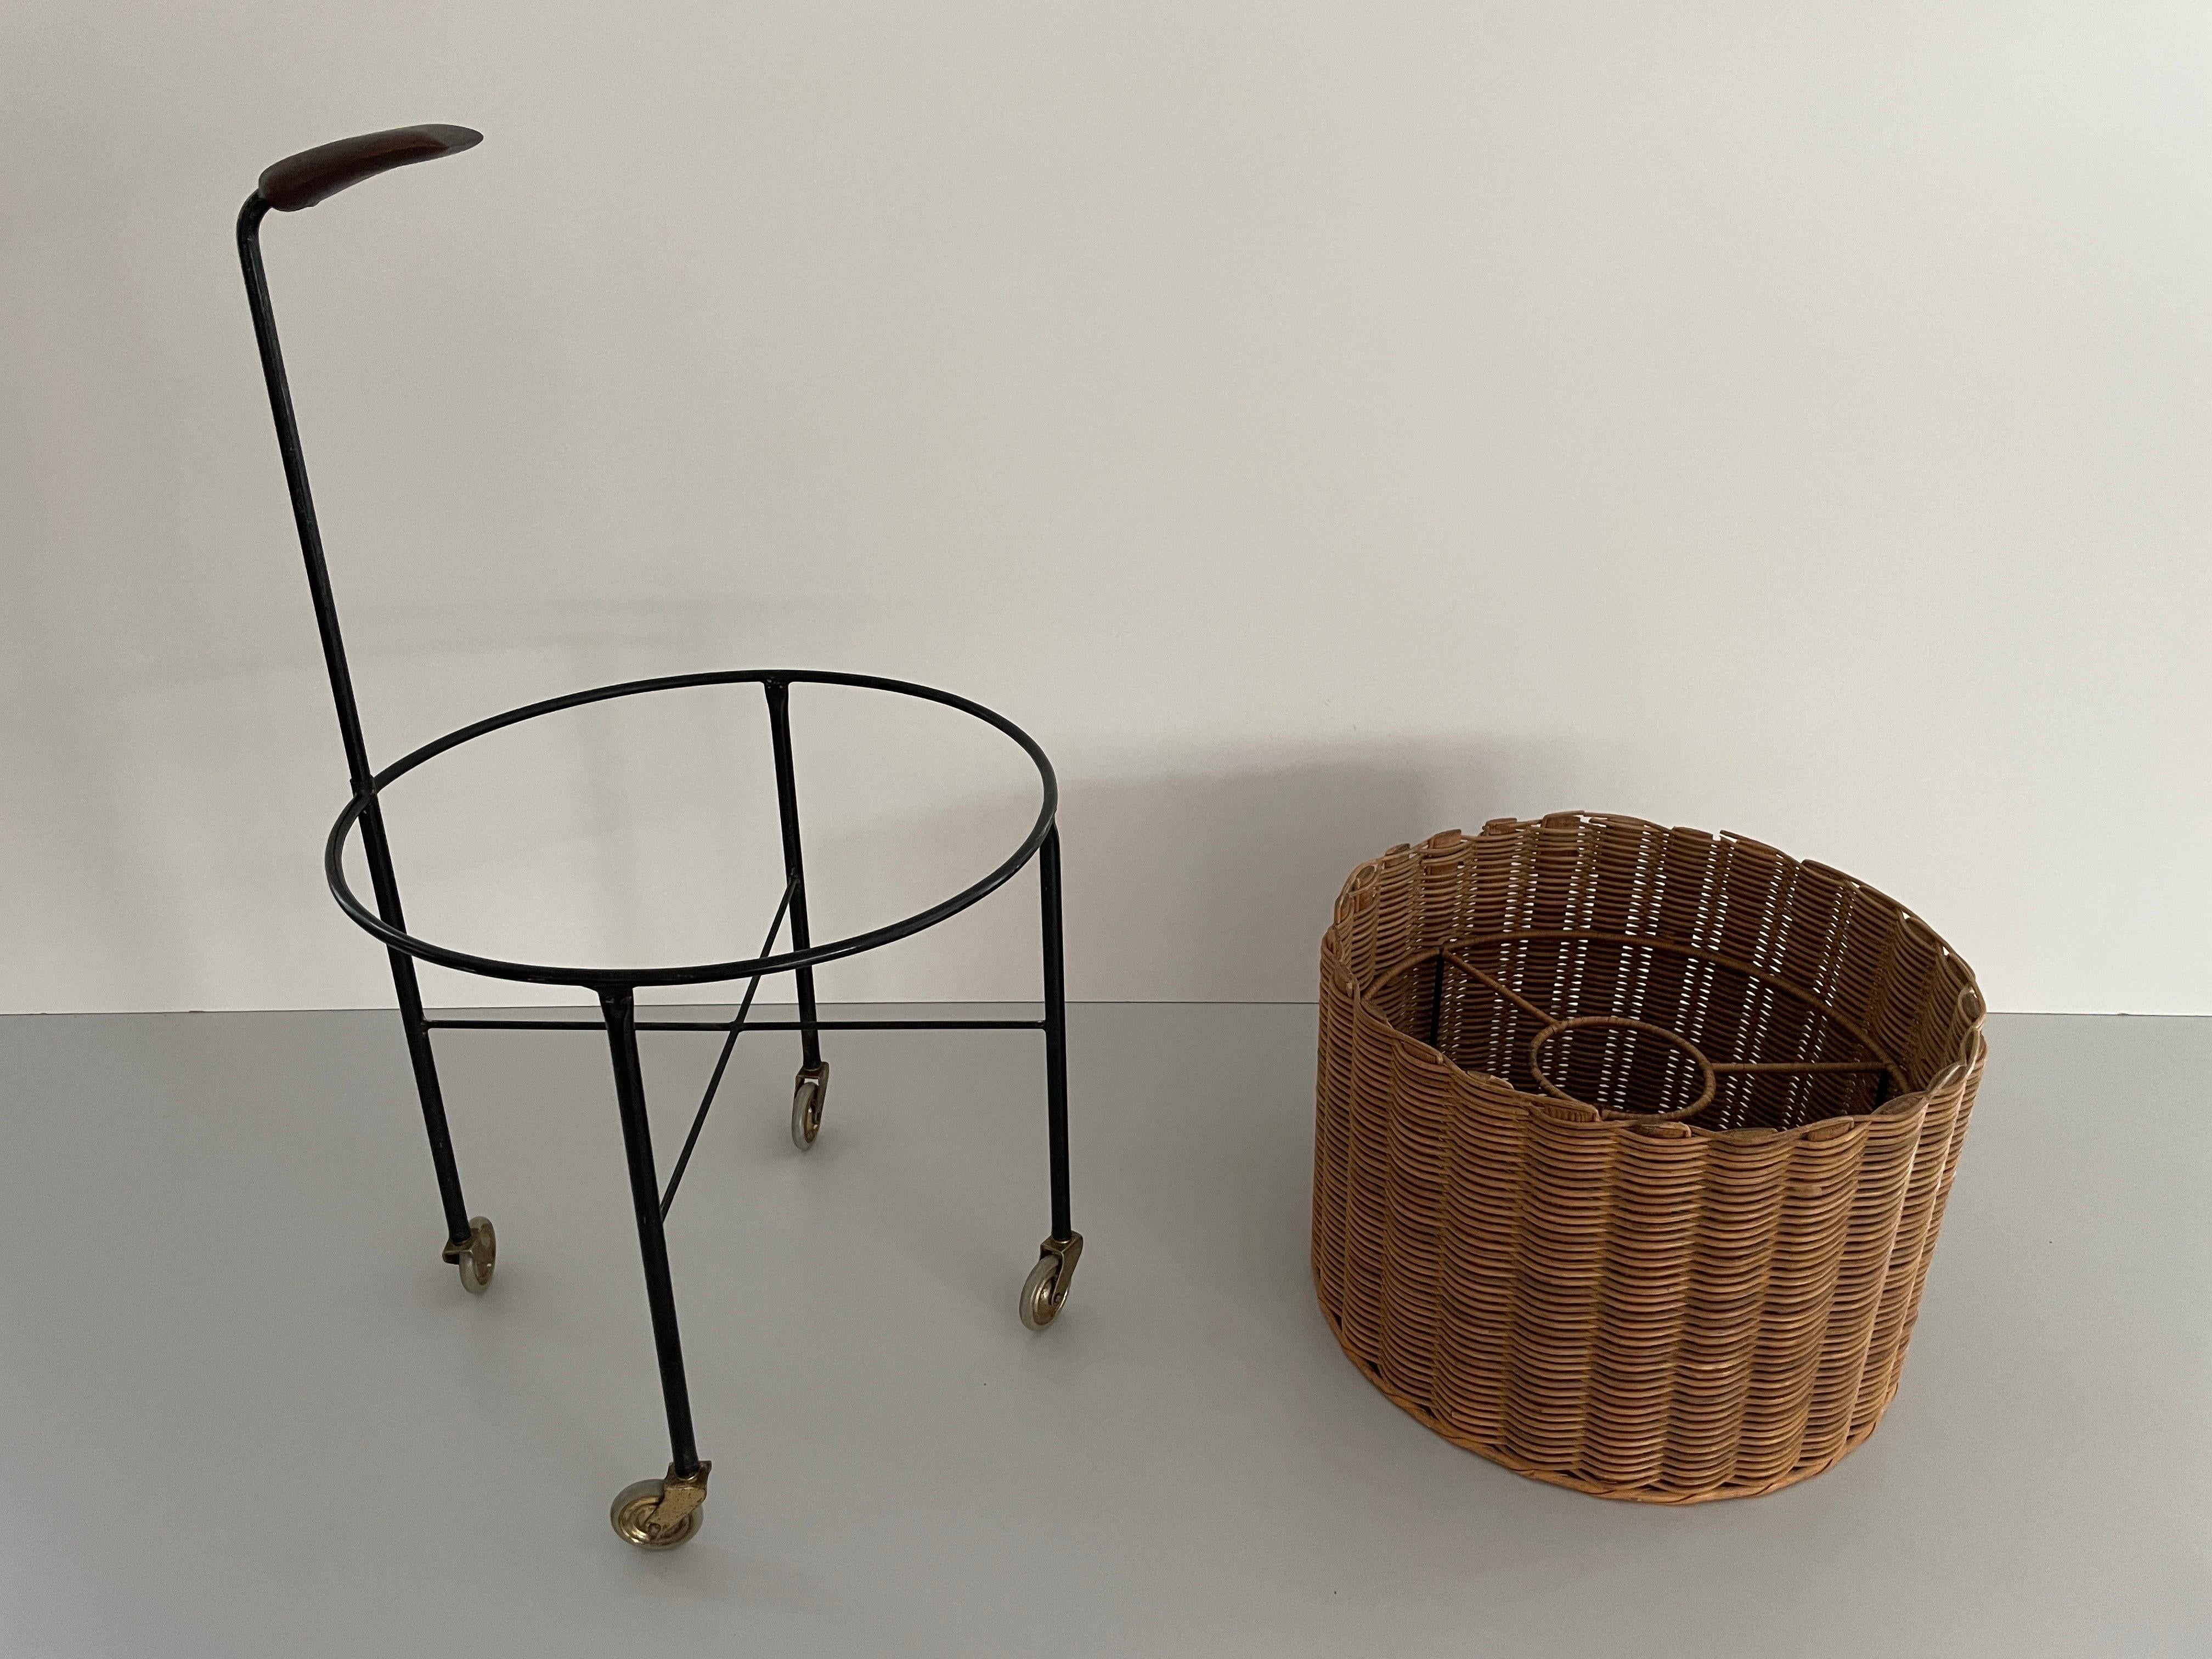 Wicker and Black Metal Serving Bar Cart Bottle Holder, 1960s, Germany In Excellent Condition For Sale In Hagenbach, DE